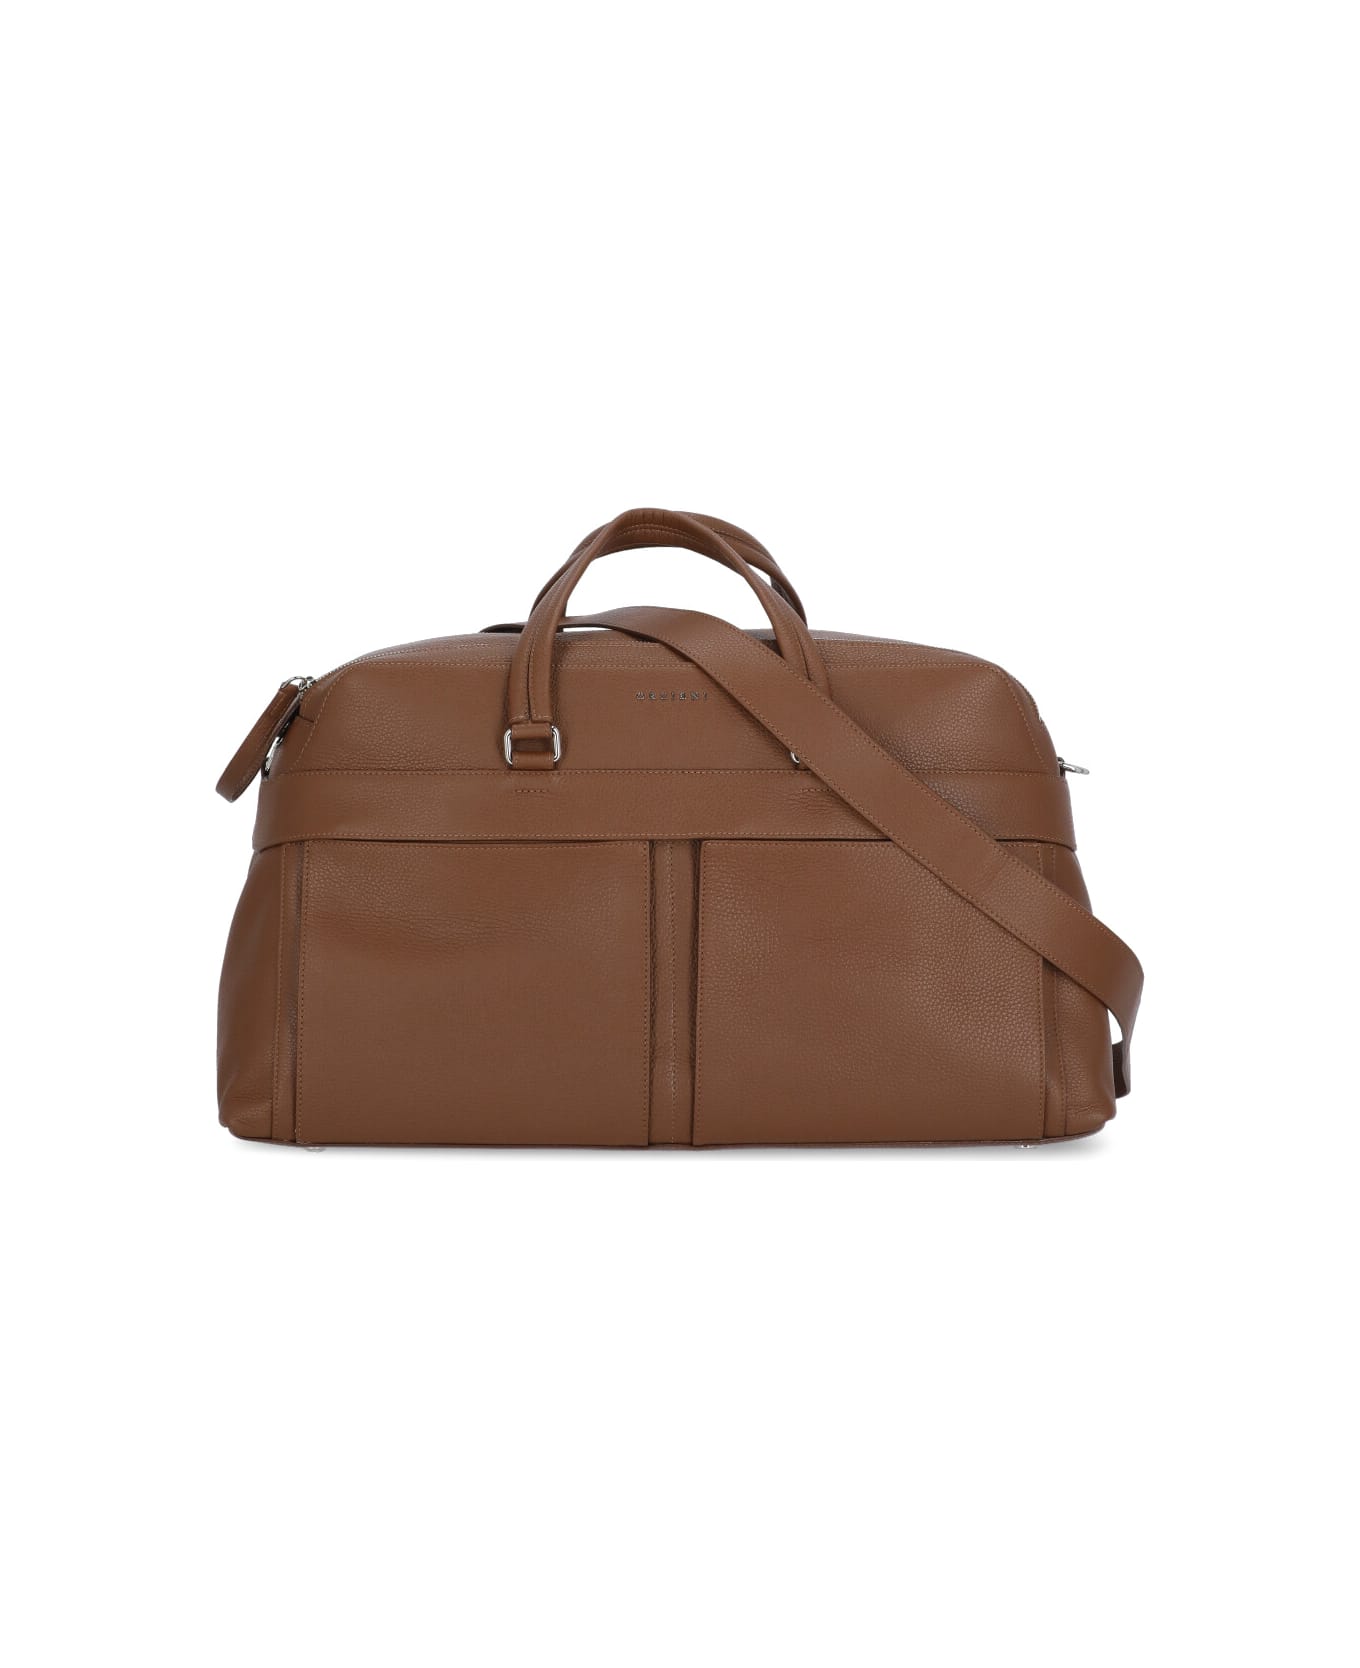 Orciani Micron Pebbled Leather Travel Bag